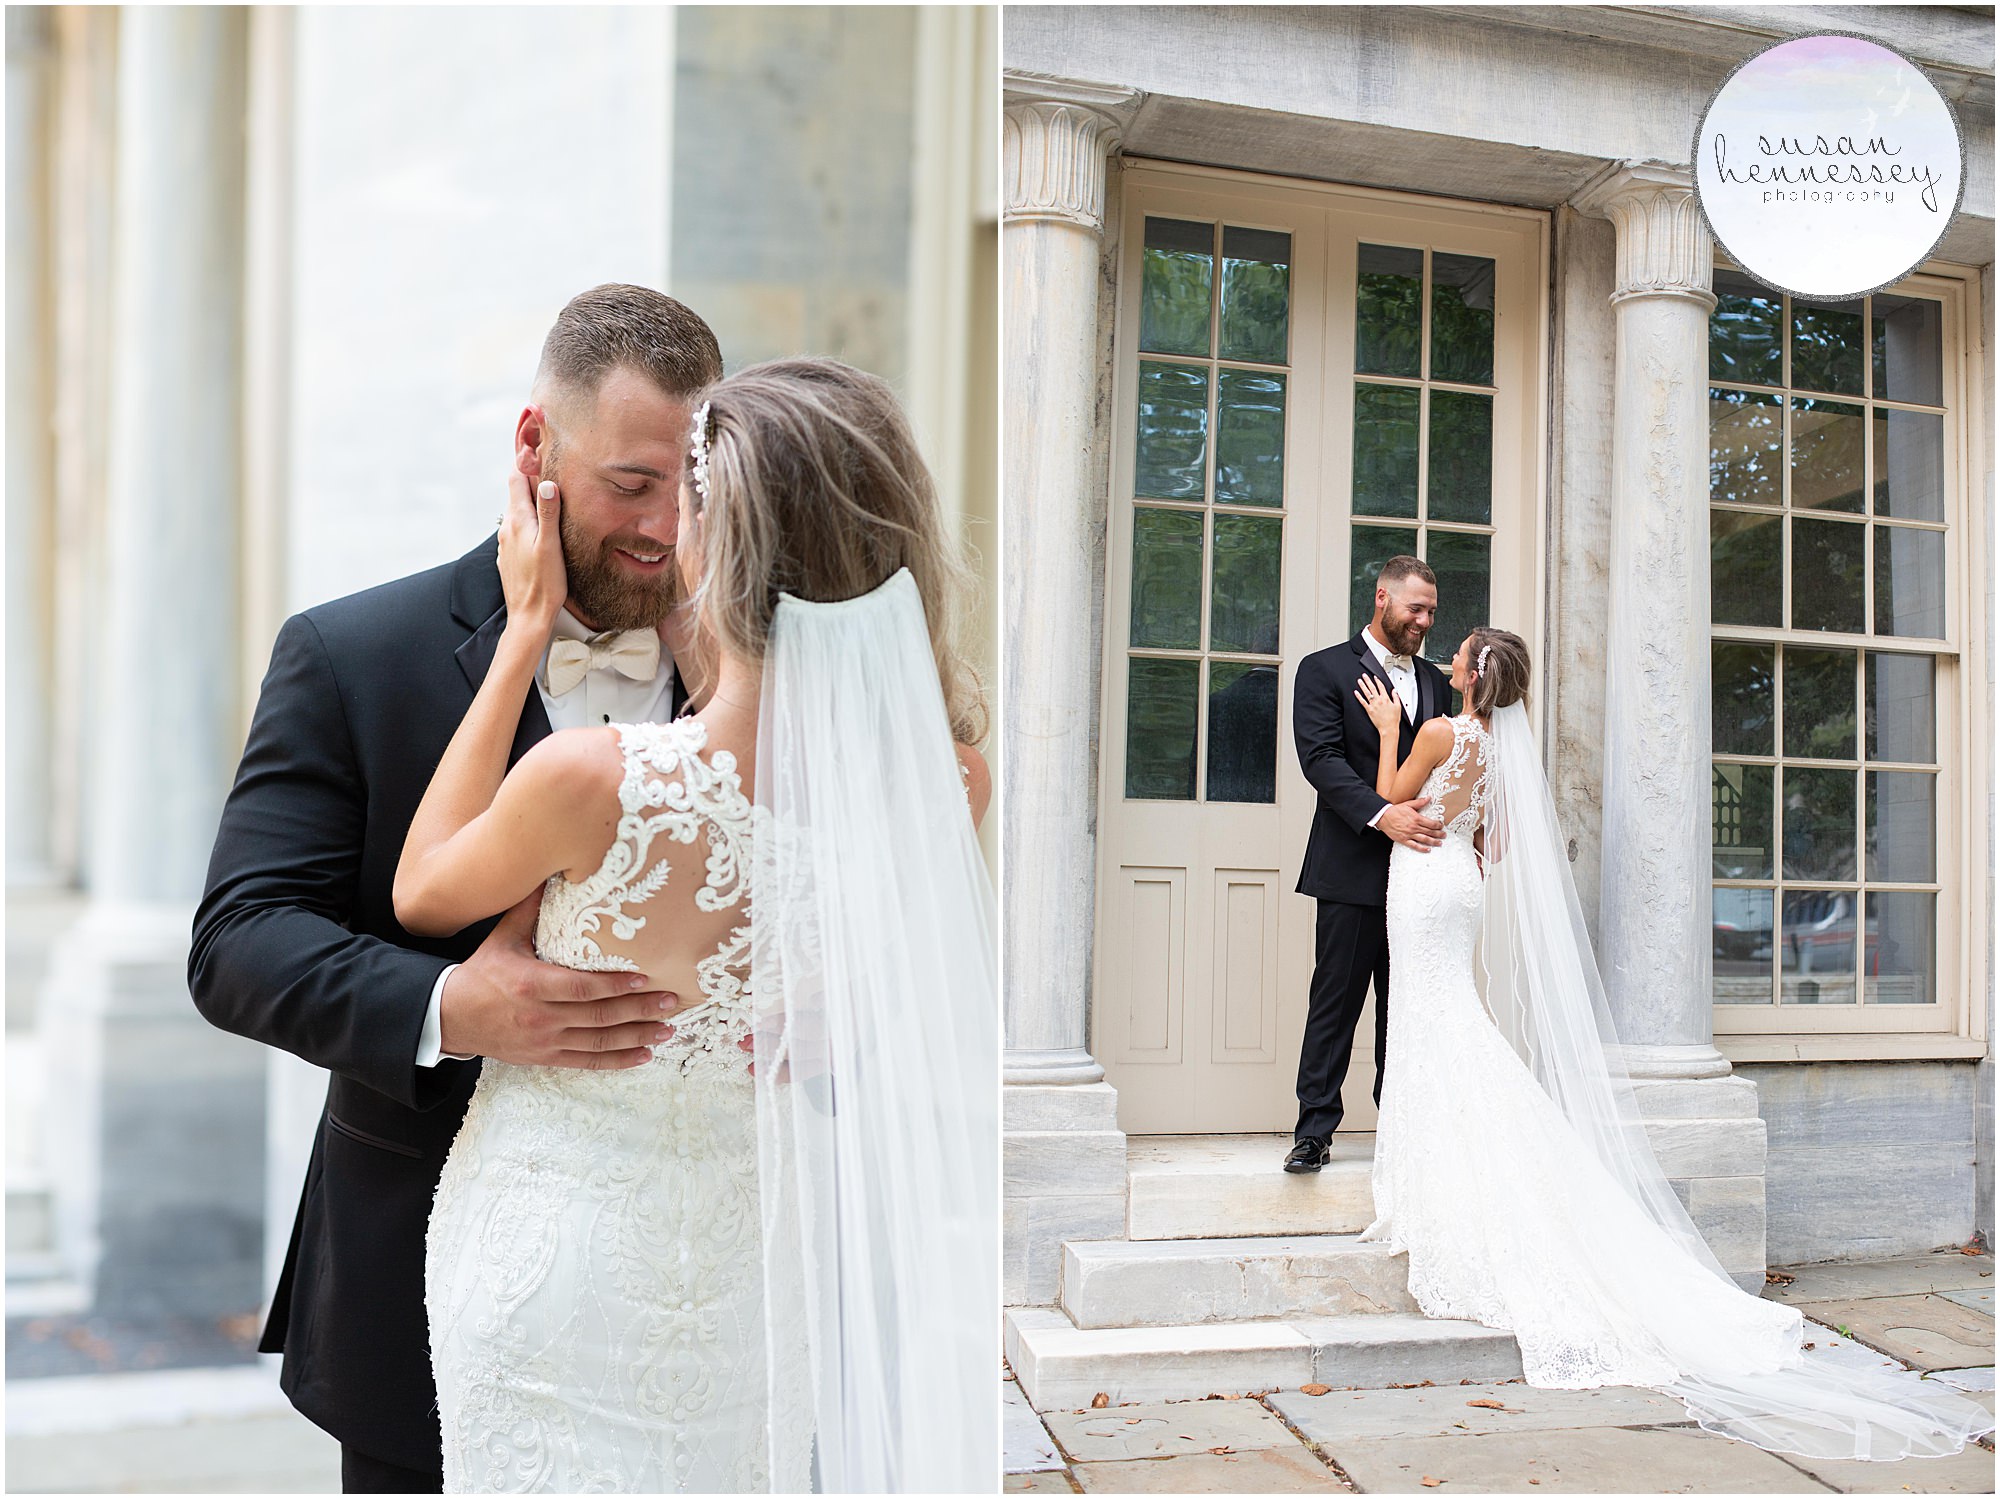 Bride and groom portraits at Summer wedding in Philly